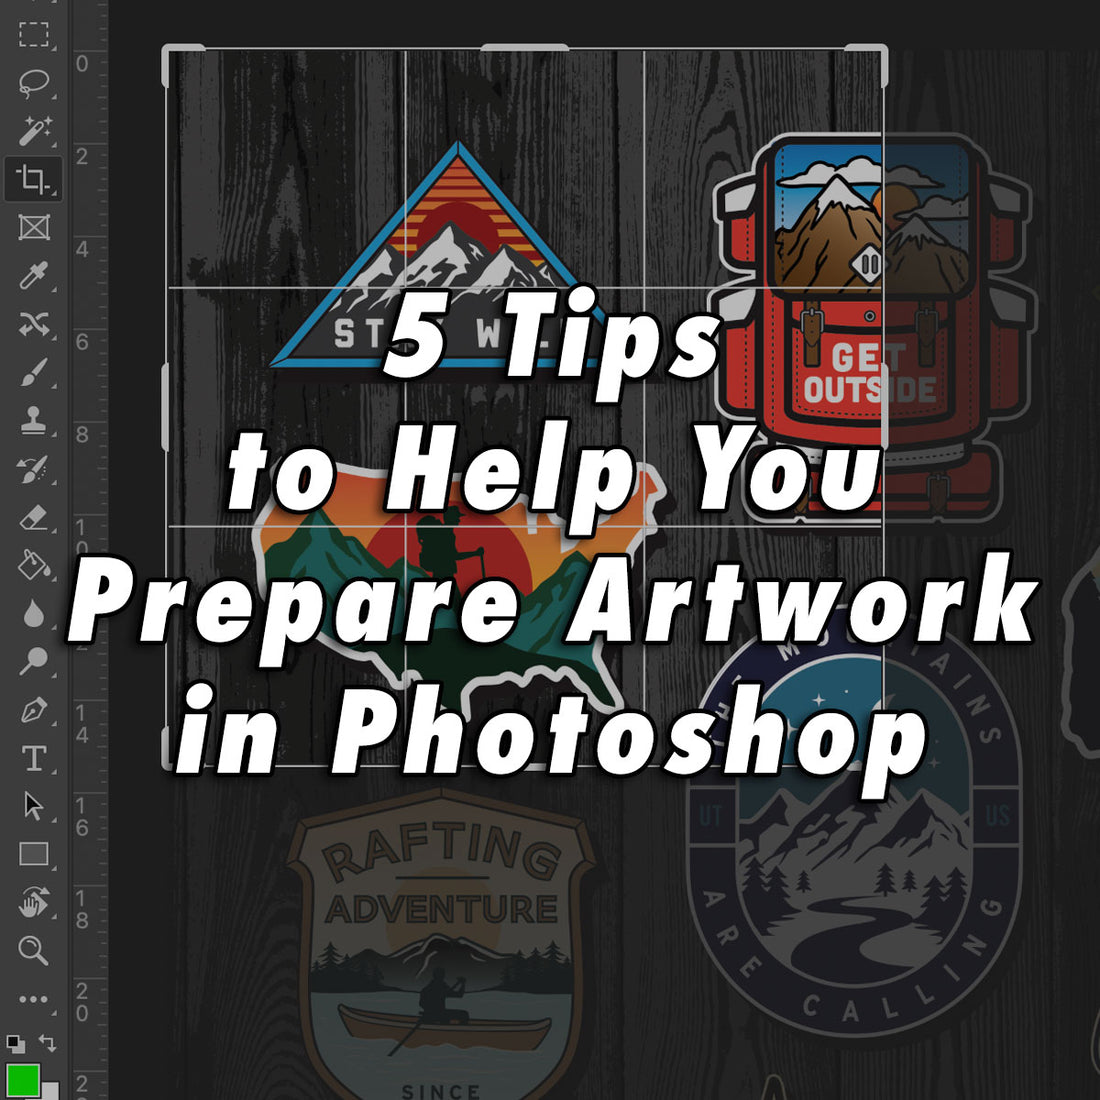 Tips to Help You Prepare Artwork in Photoshop